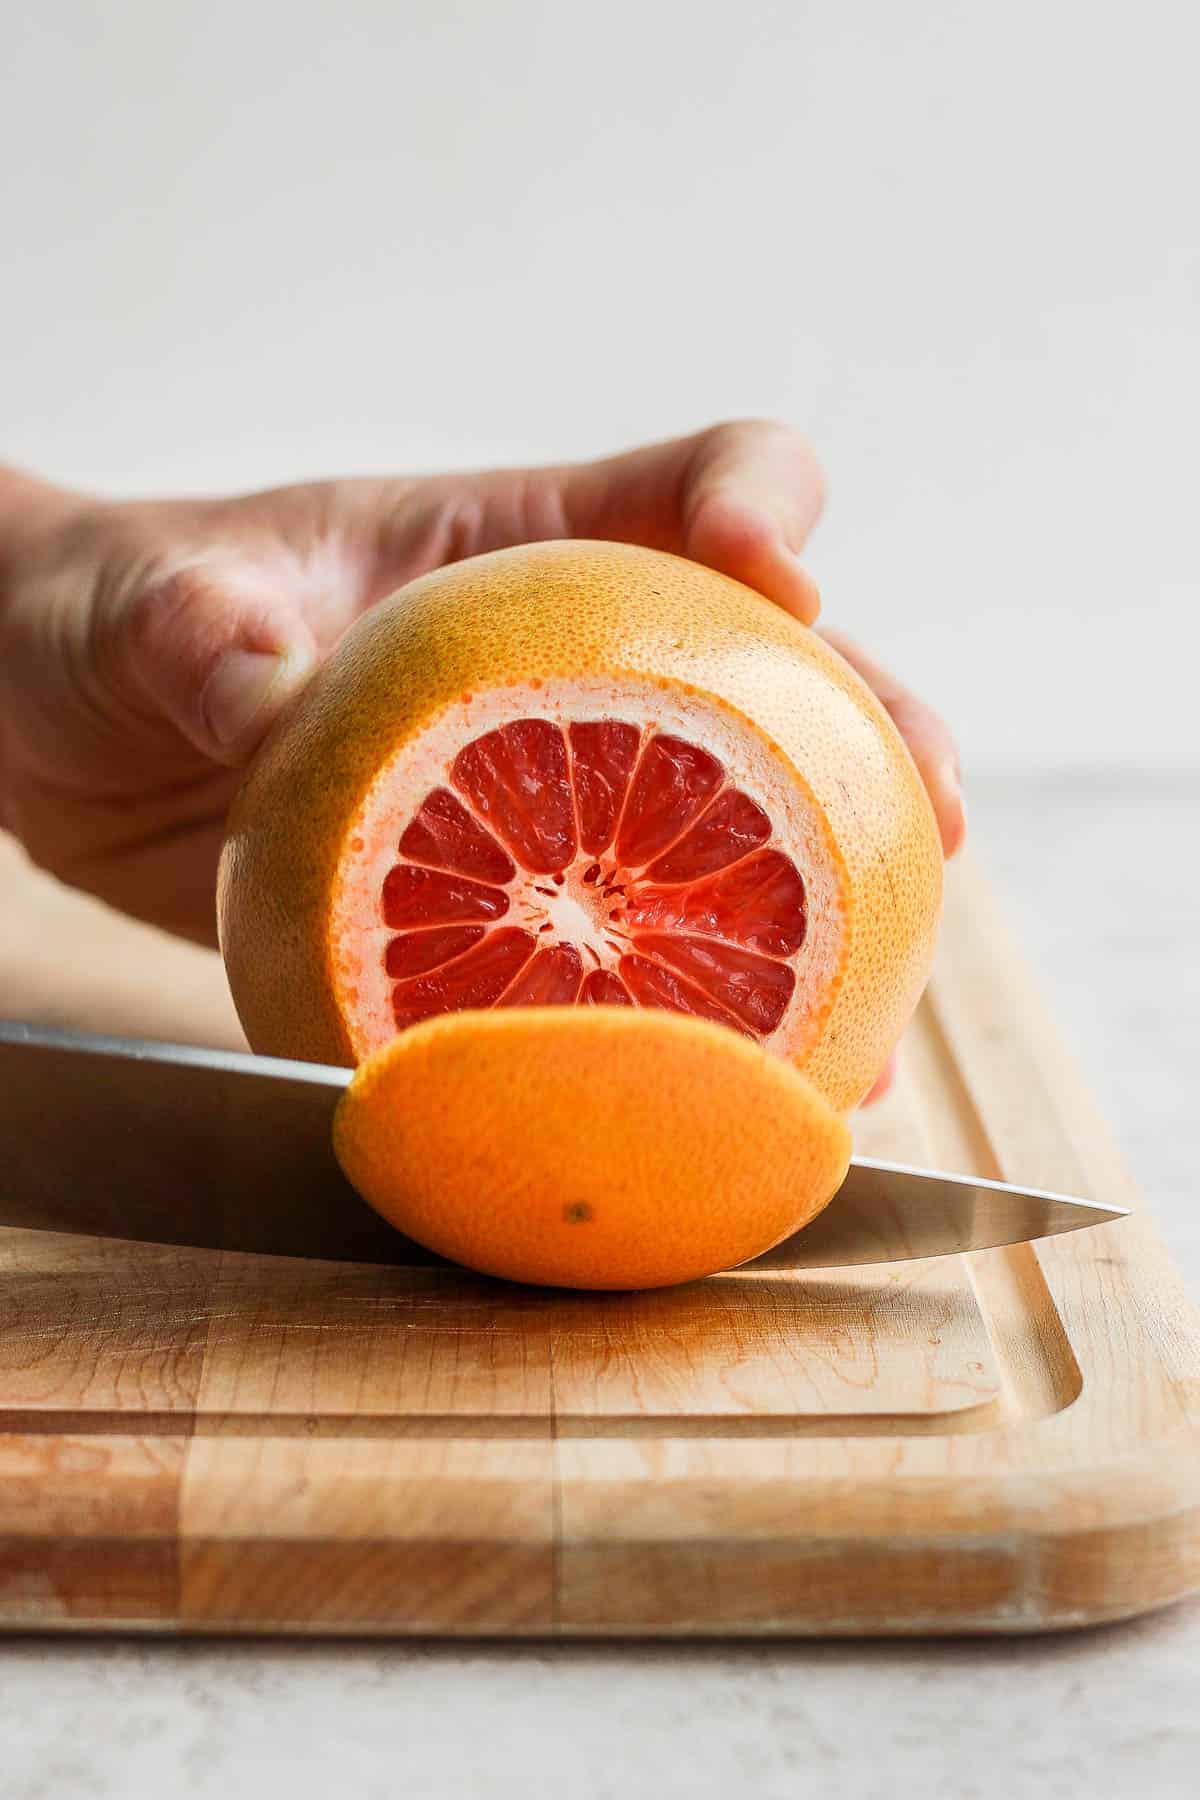 Slicing off top of grapefruit on cutting board